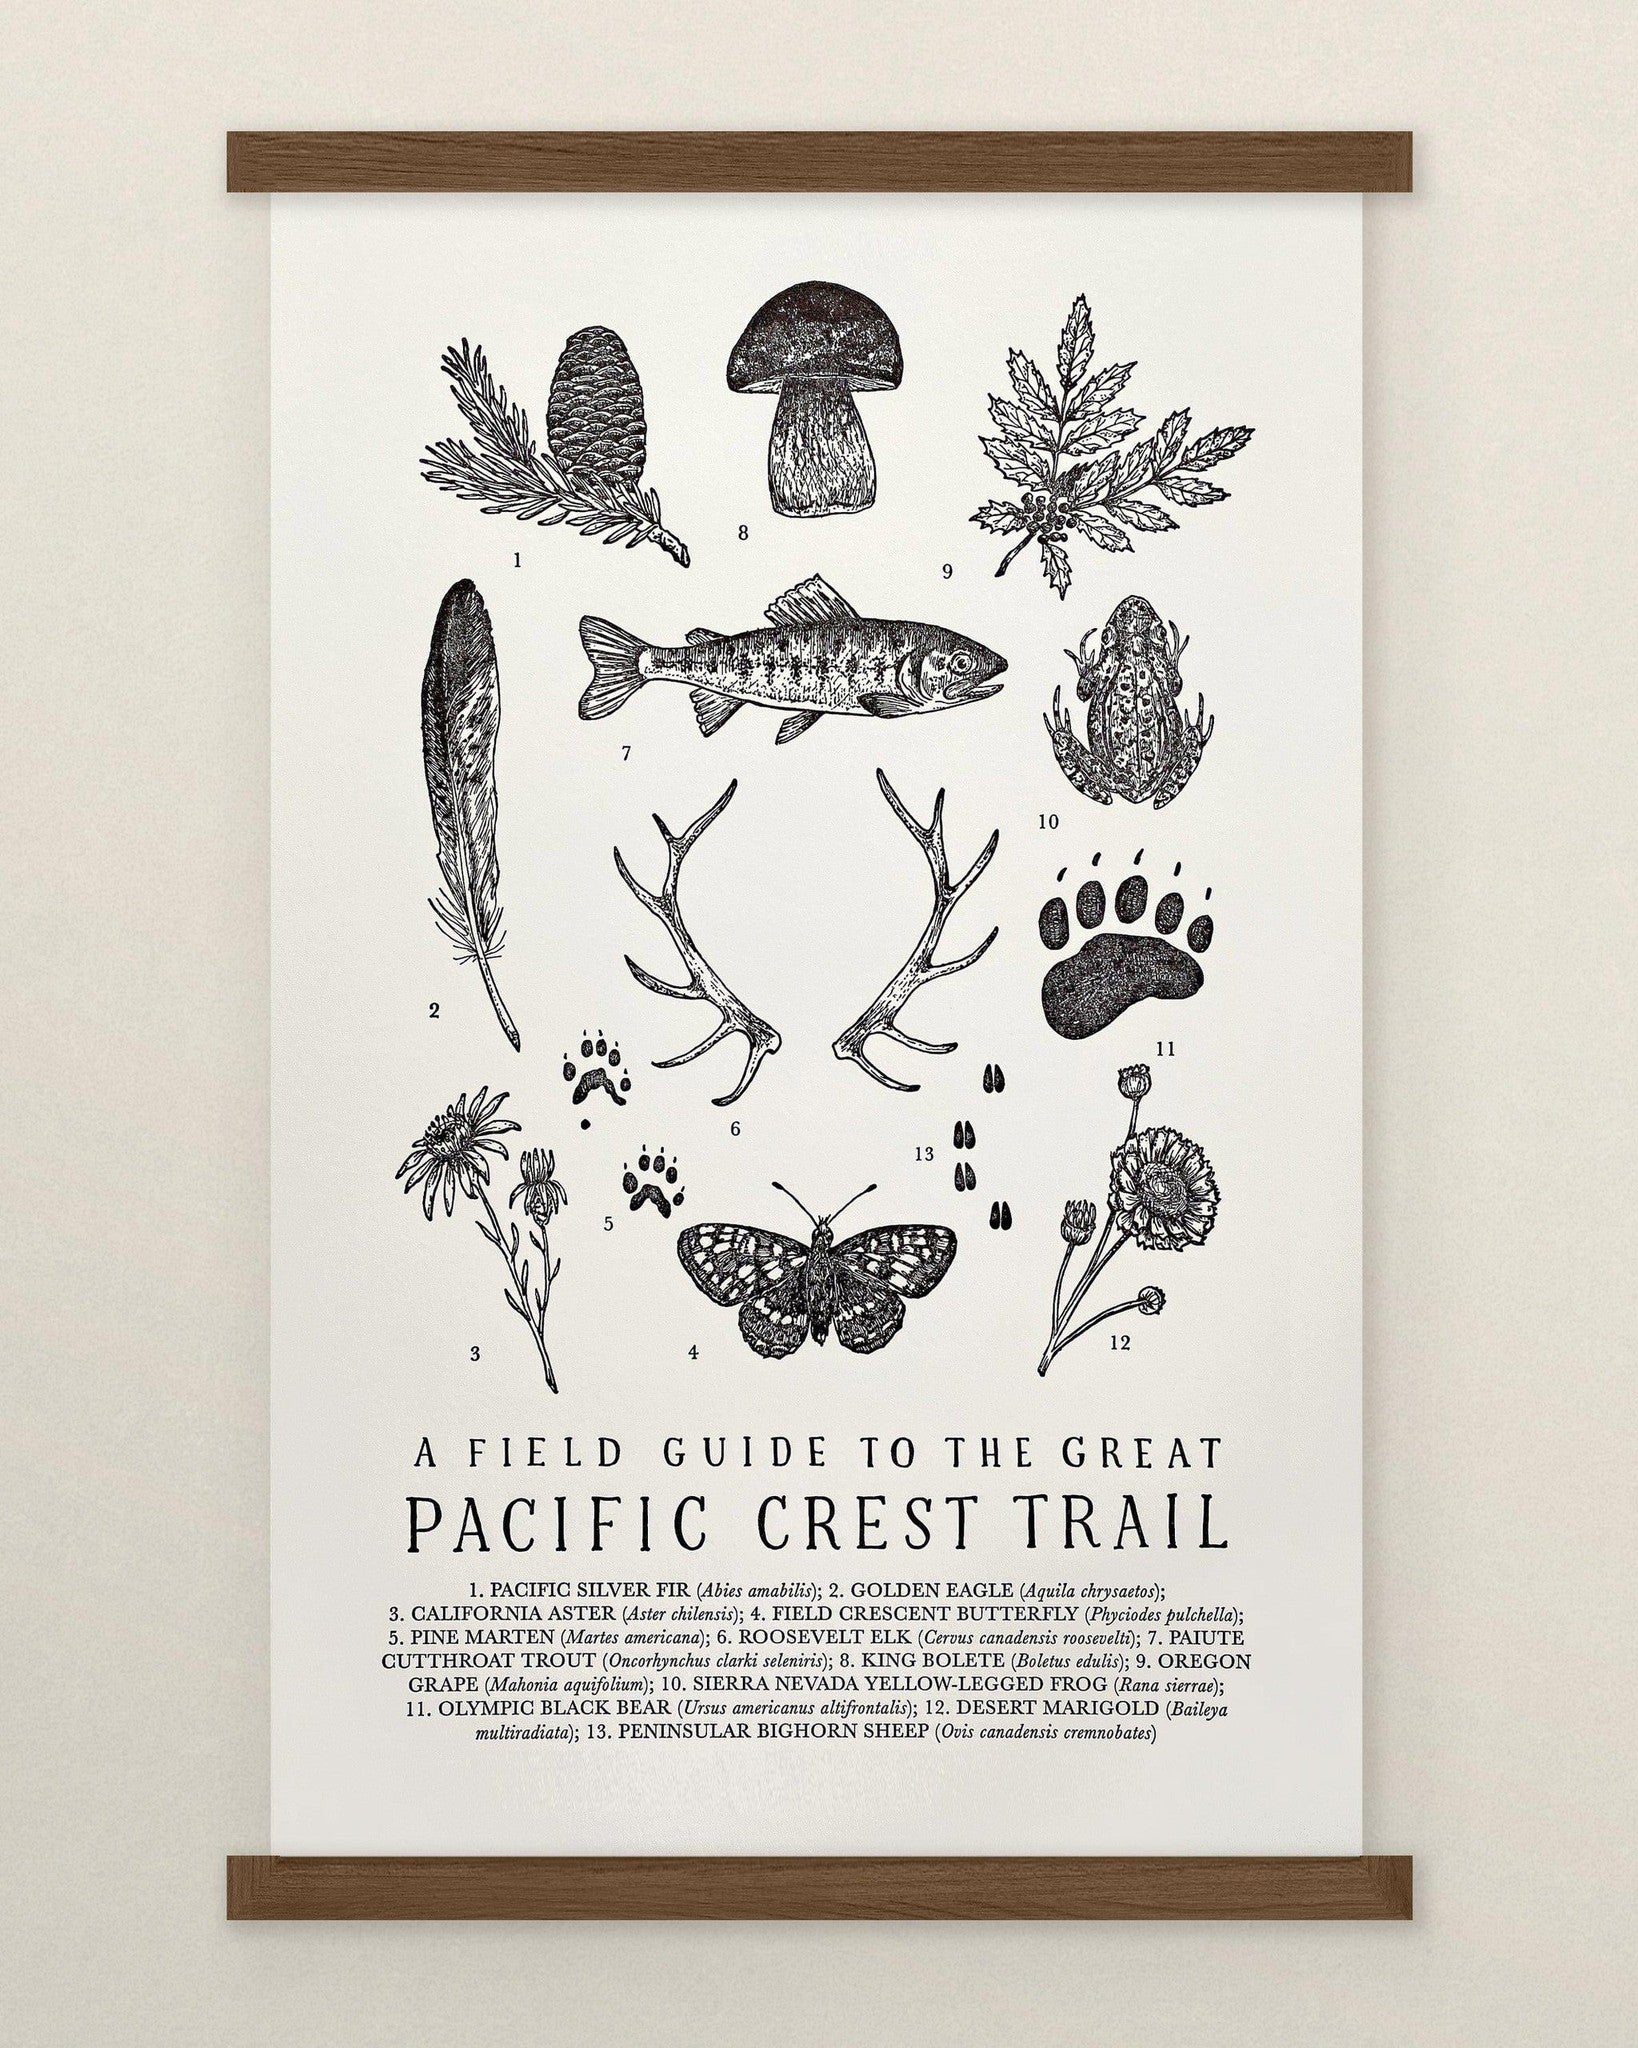 A poster with a Pacific Crest Trail Field Guide Letterpress Print by The Wild Wander.